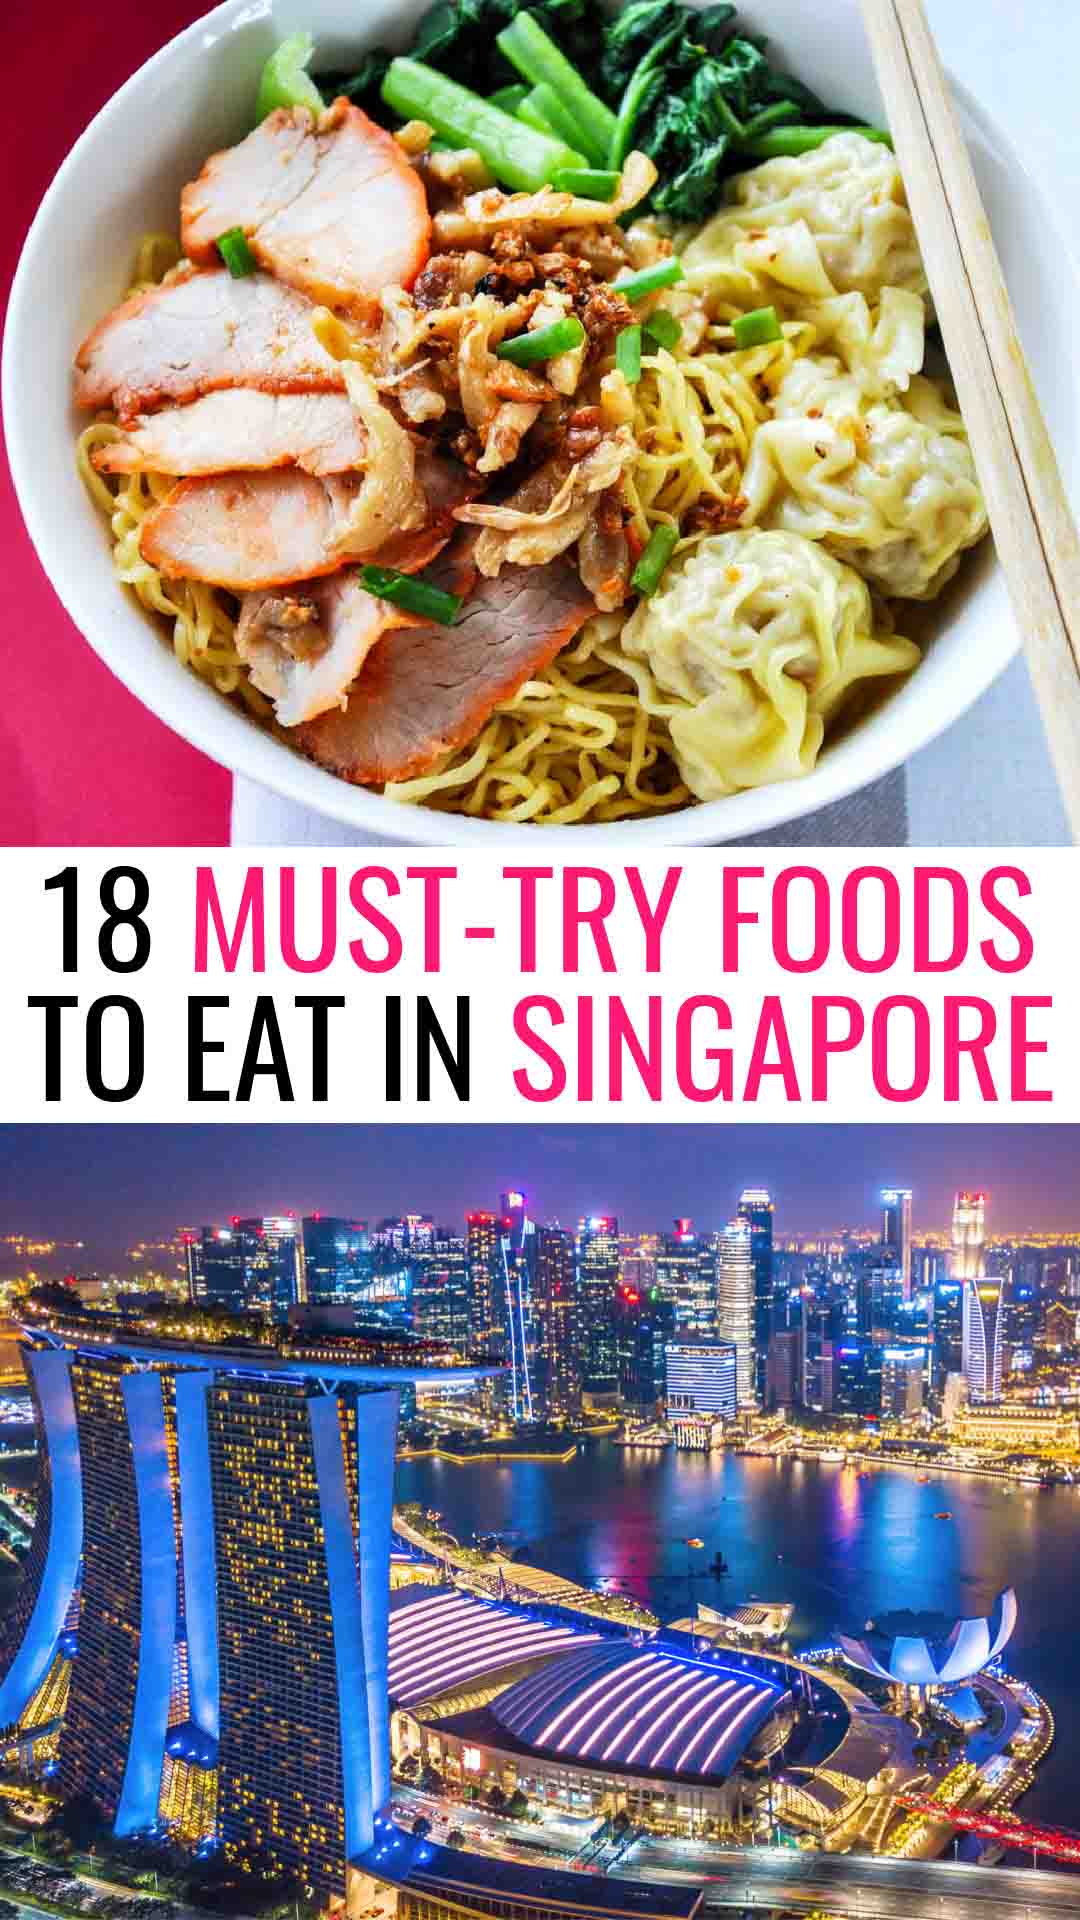 18 Must-Try Foods to Eat in Singapore with photos of wanton mee noodle dish from Singapore and Singapore skyline with Marina Bay Sands at night